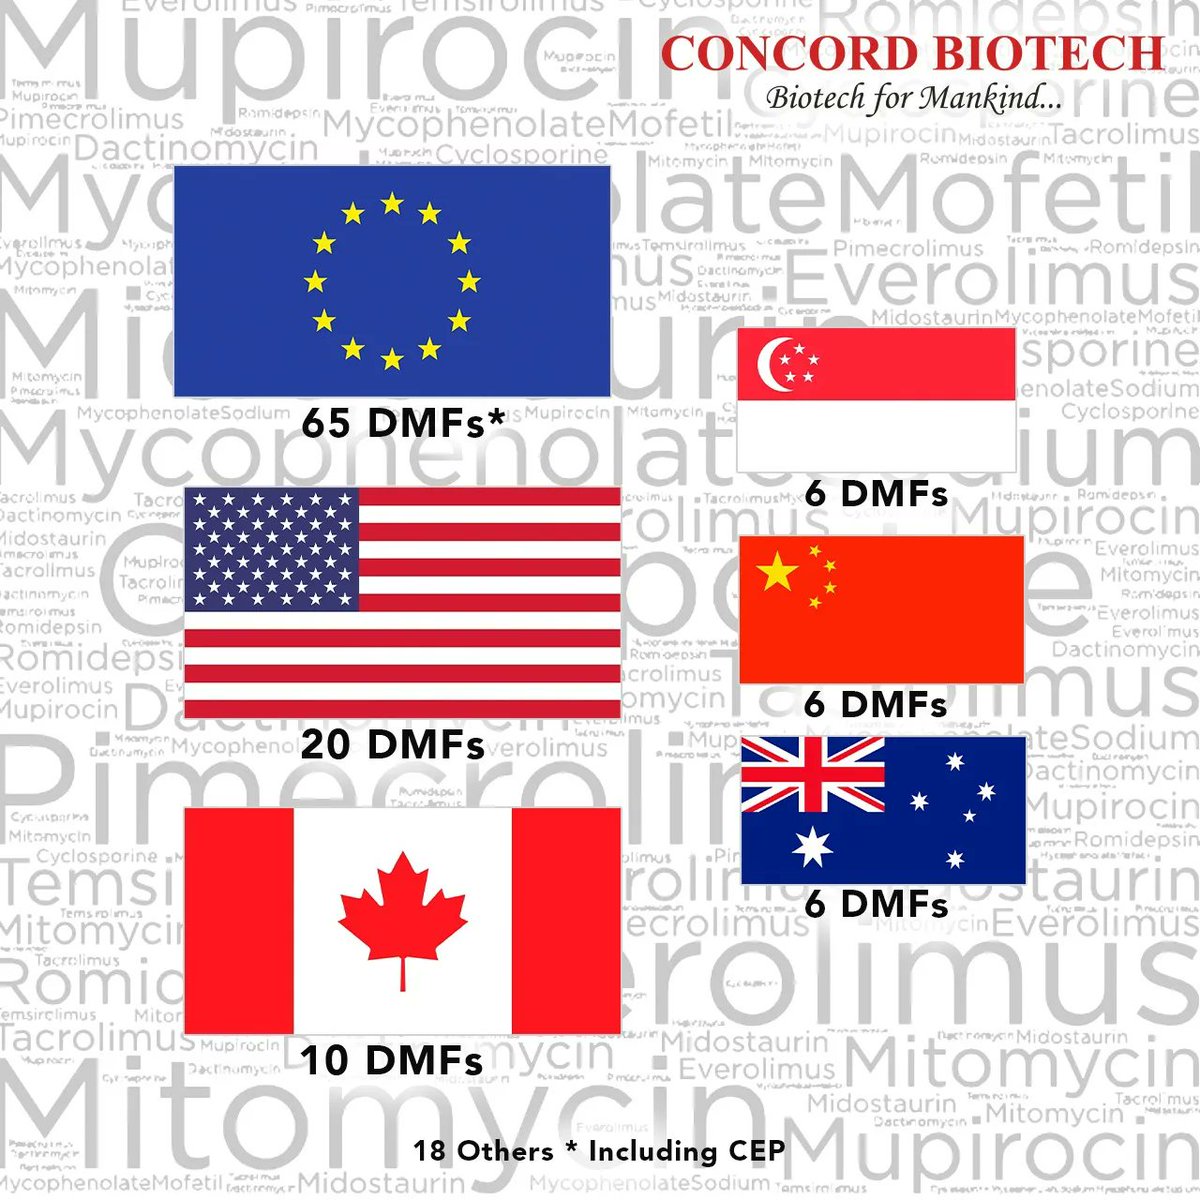 Concord Biotech's achievement of filing 130 plus DMFs is a testament of our commitment.
These DMF filings span across 12 countries, highlighting Concord Biotech's impressive global footprint. 

#DMF #Drugmasterfile #API  #therapeuticsegment #formulations #globalfootprint